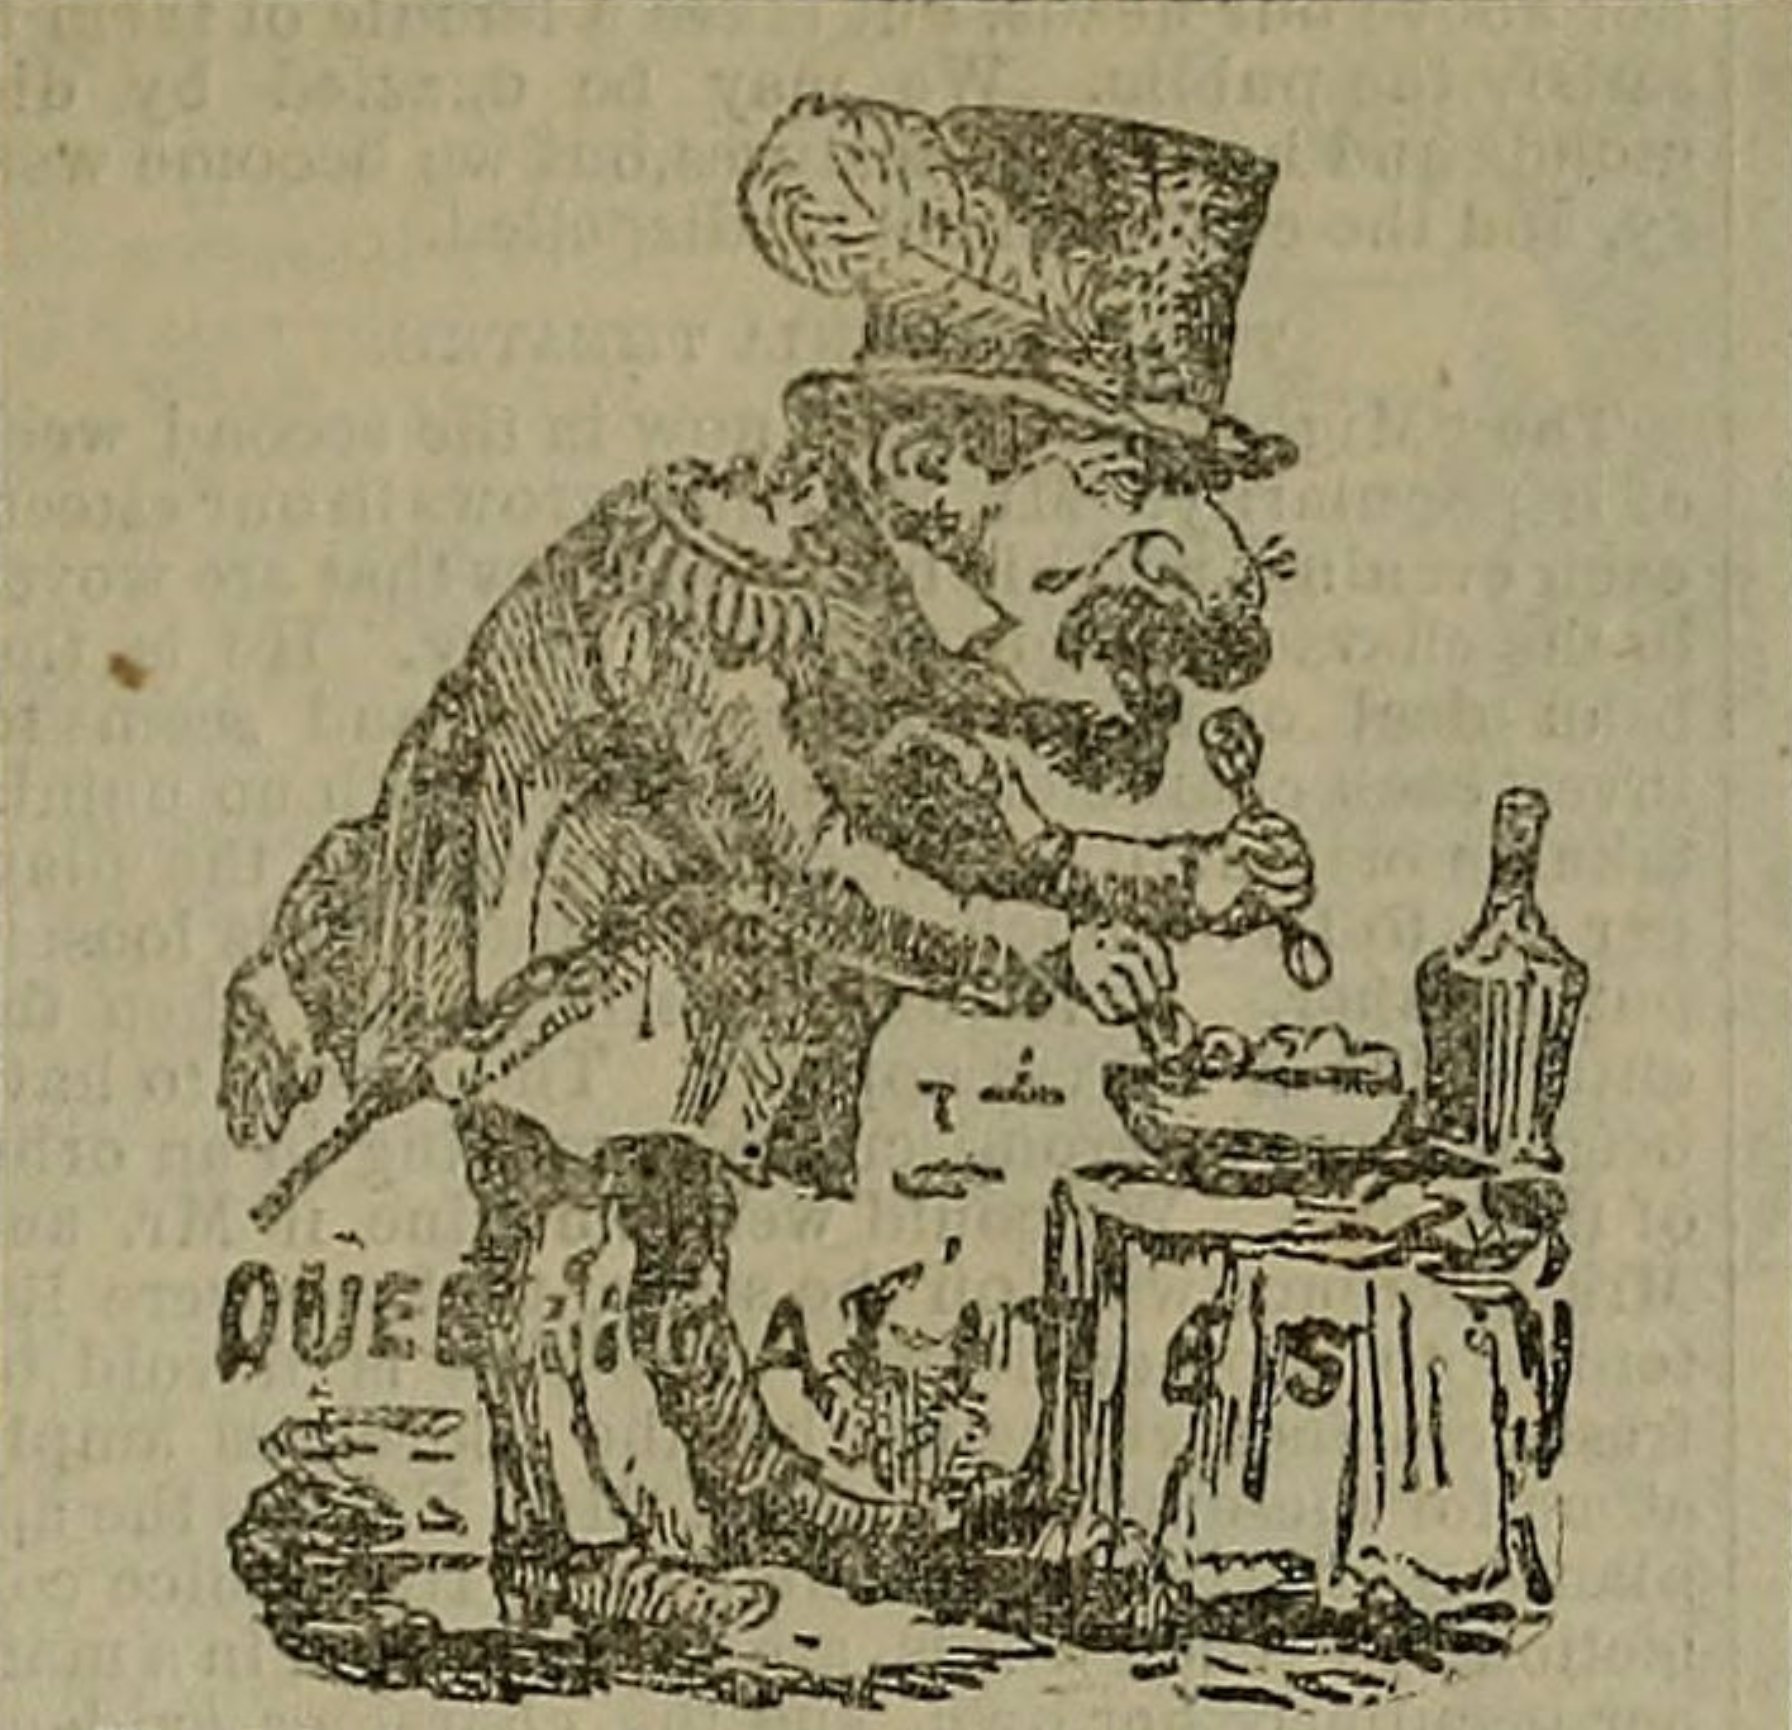   Emperor Norton, cartoon, 1877, artist unknown.  This appeared in  Thistleton’s Illustrated Jolly Giant , vol. 8, no. 1, 6 January 1877, p. 11. The work appeared in at least two other issues of the weekly — the 3rd and the 24th of February 1877 — su